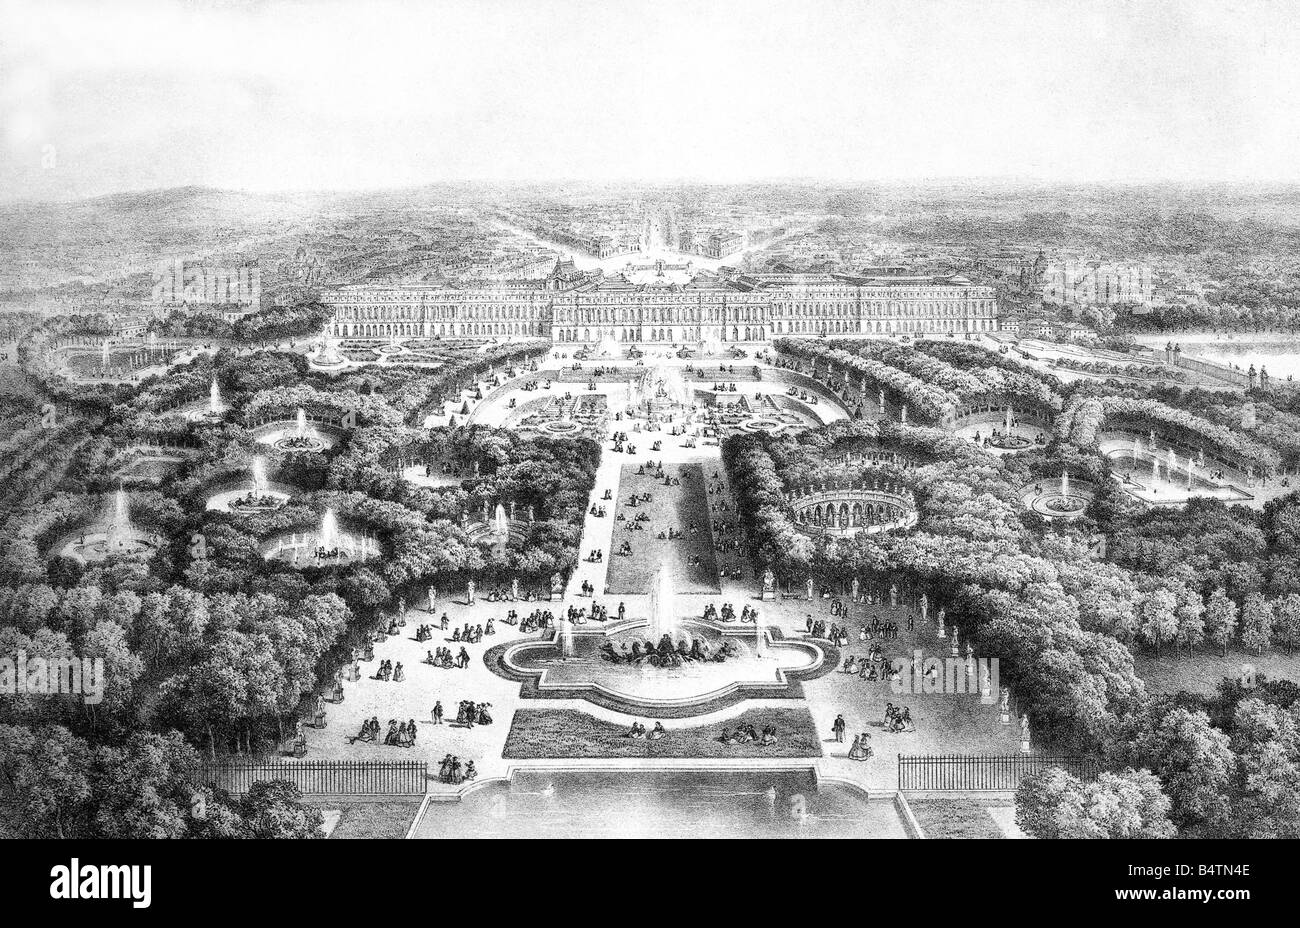 architecture, castles, Versailles Palace, view, lithograph, 19th century, park, historic, historical, people, Stock Photo